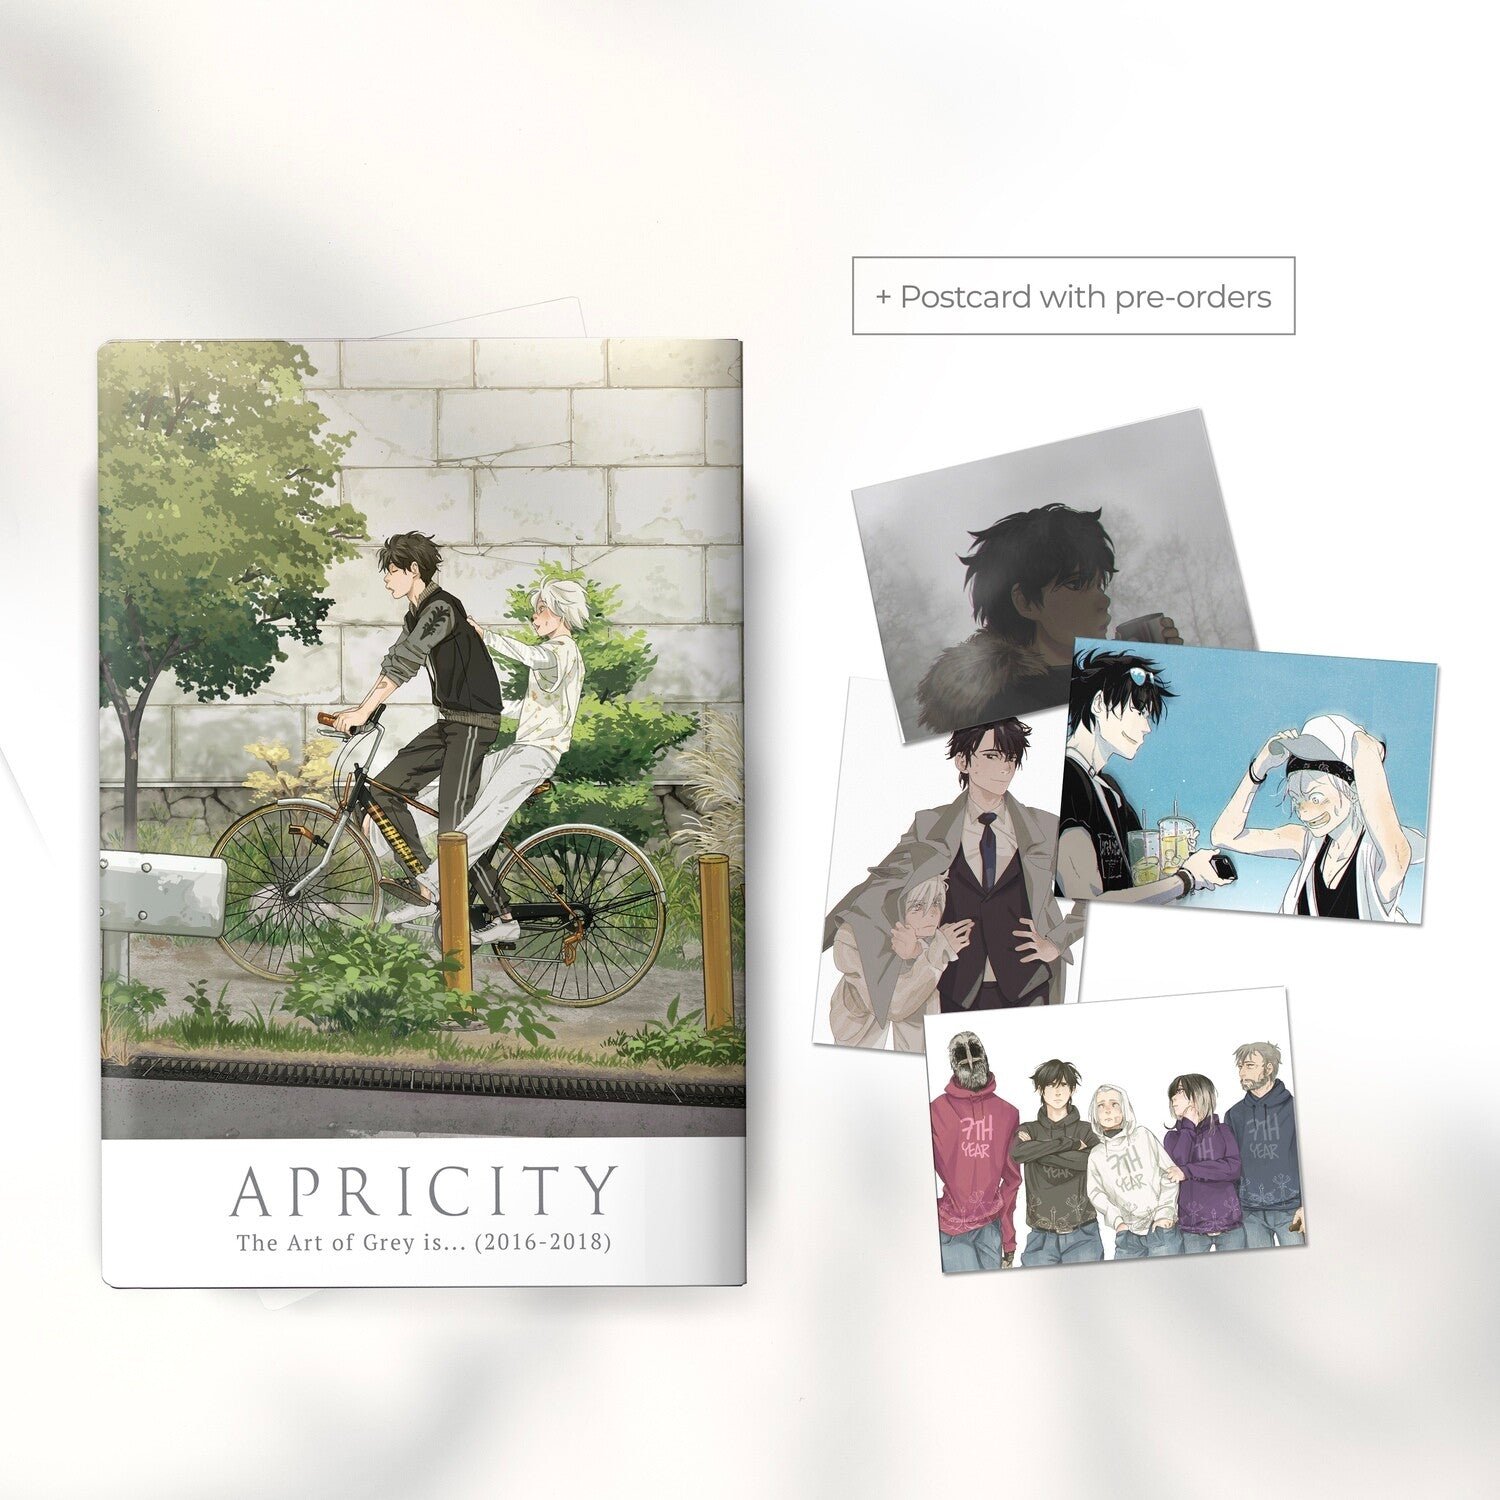 [Book] Apricity: The Art of Grey is... (2016-2018)